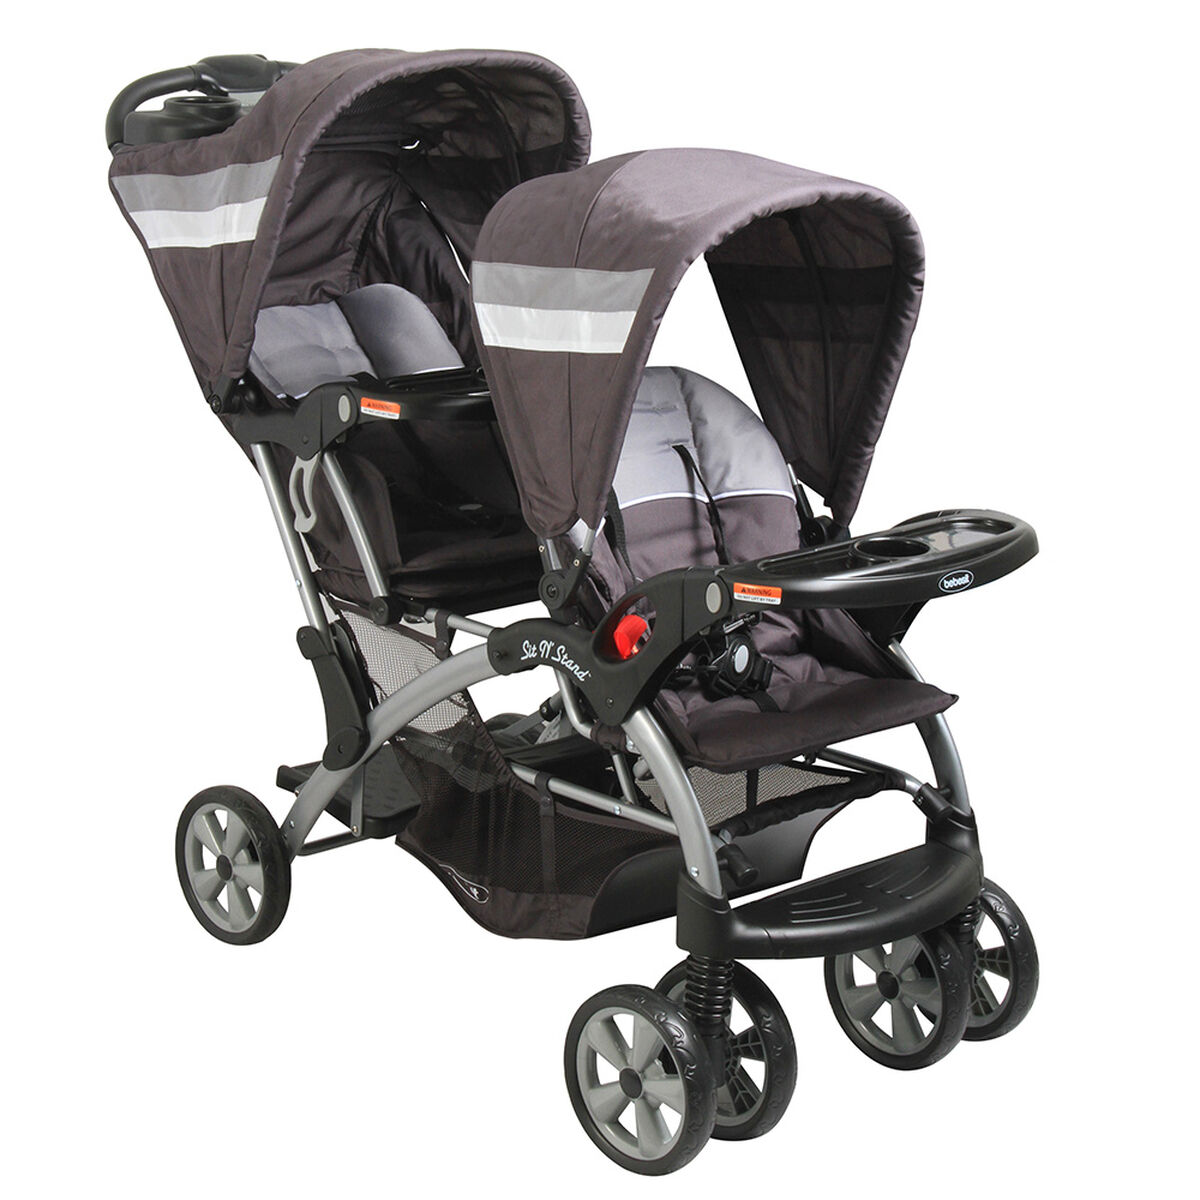 Coche Doble de Paseo Bebesit 8096 Sit And Stand